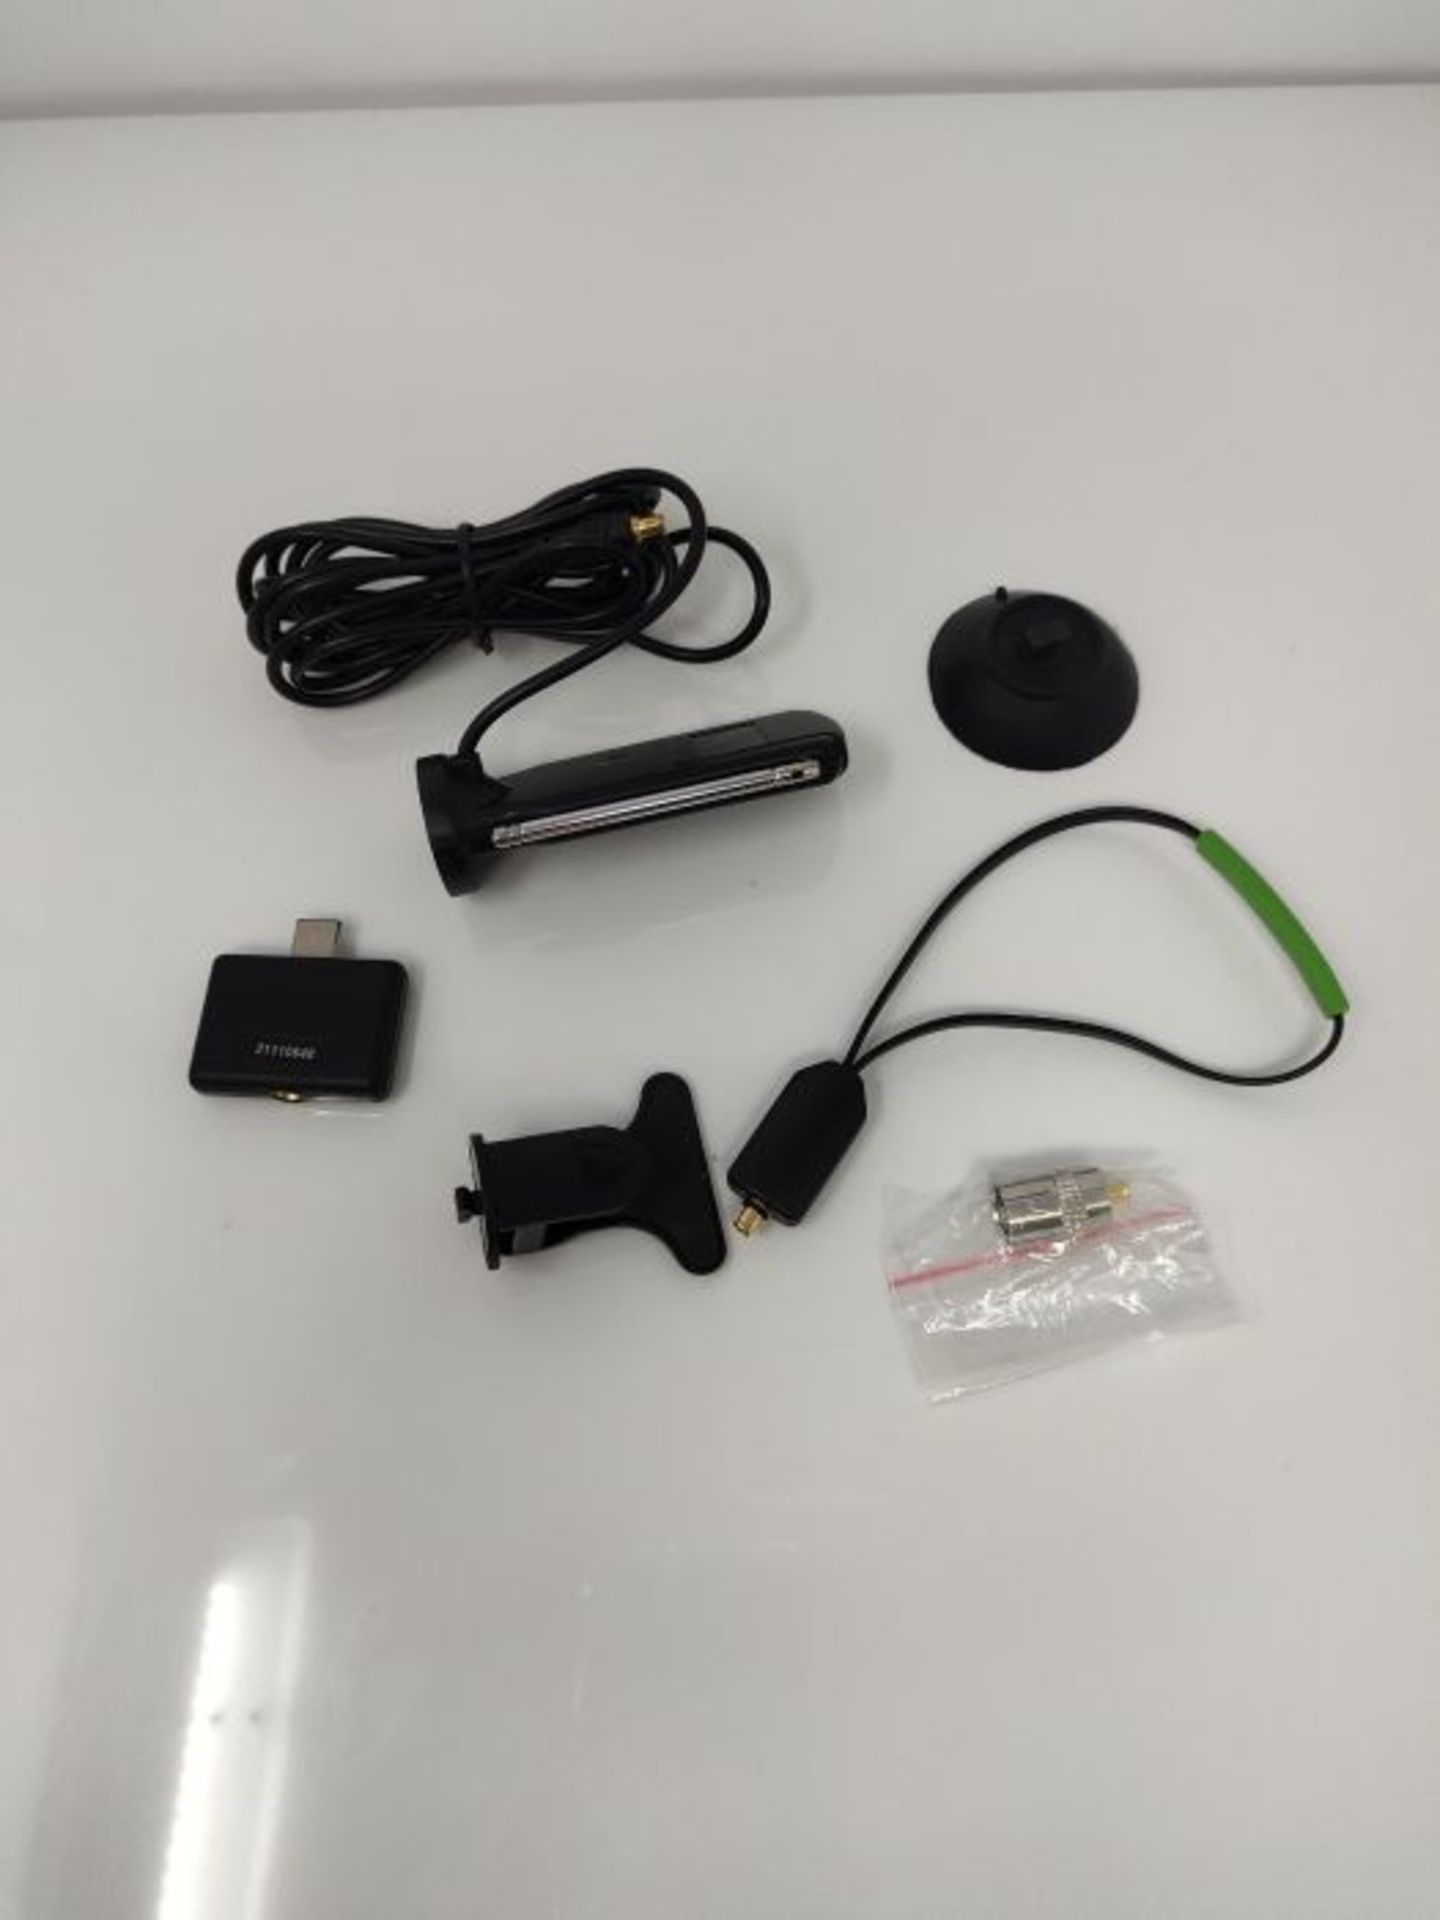 Geniatech MyGica PT362 DVB-T2 Android TV Tuner Pad TV Receiver - Image 3 of 3